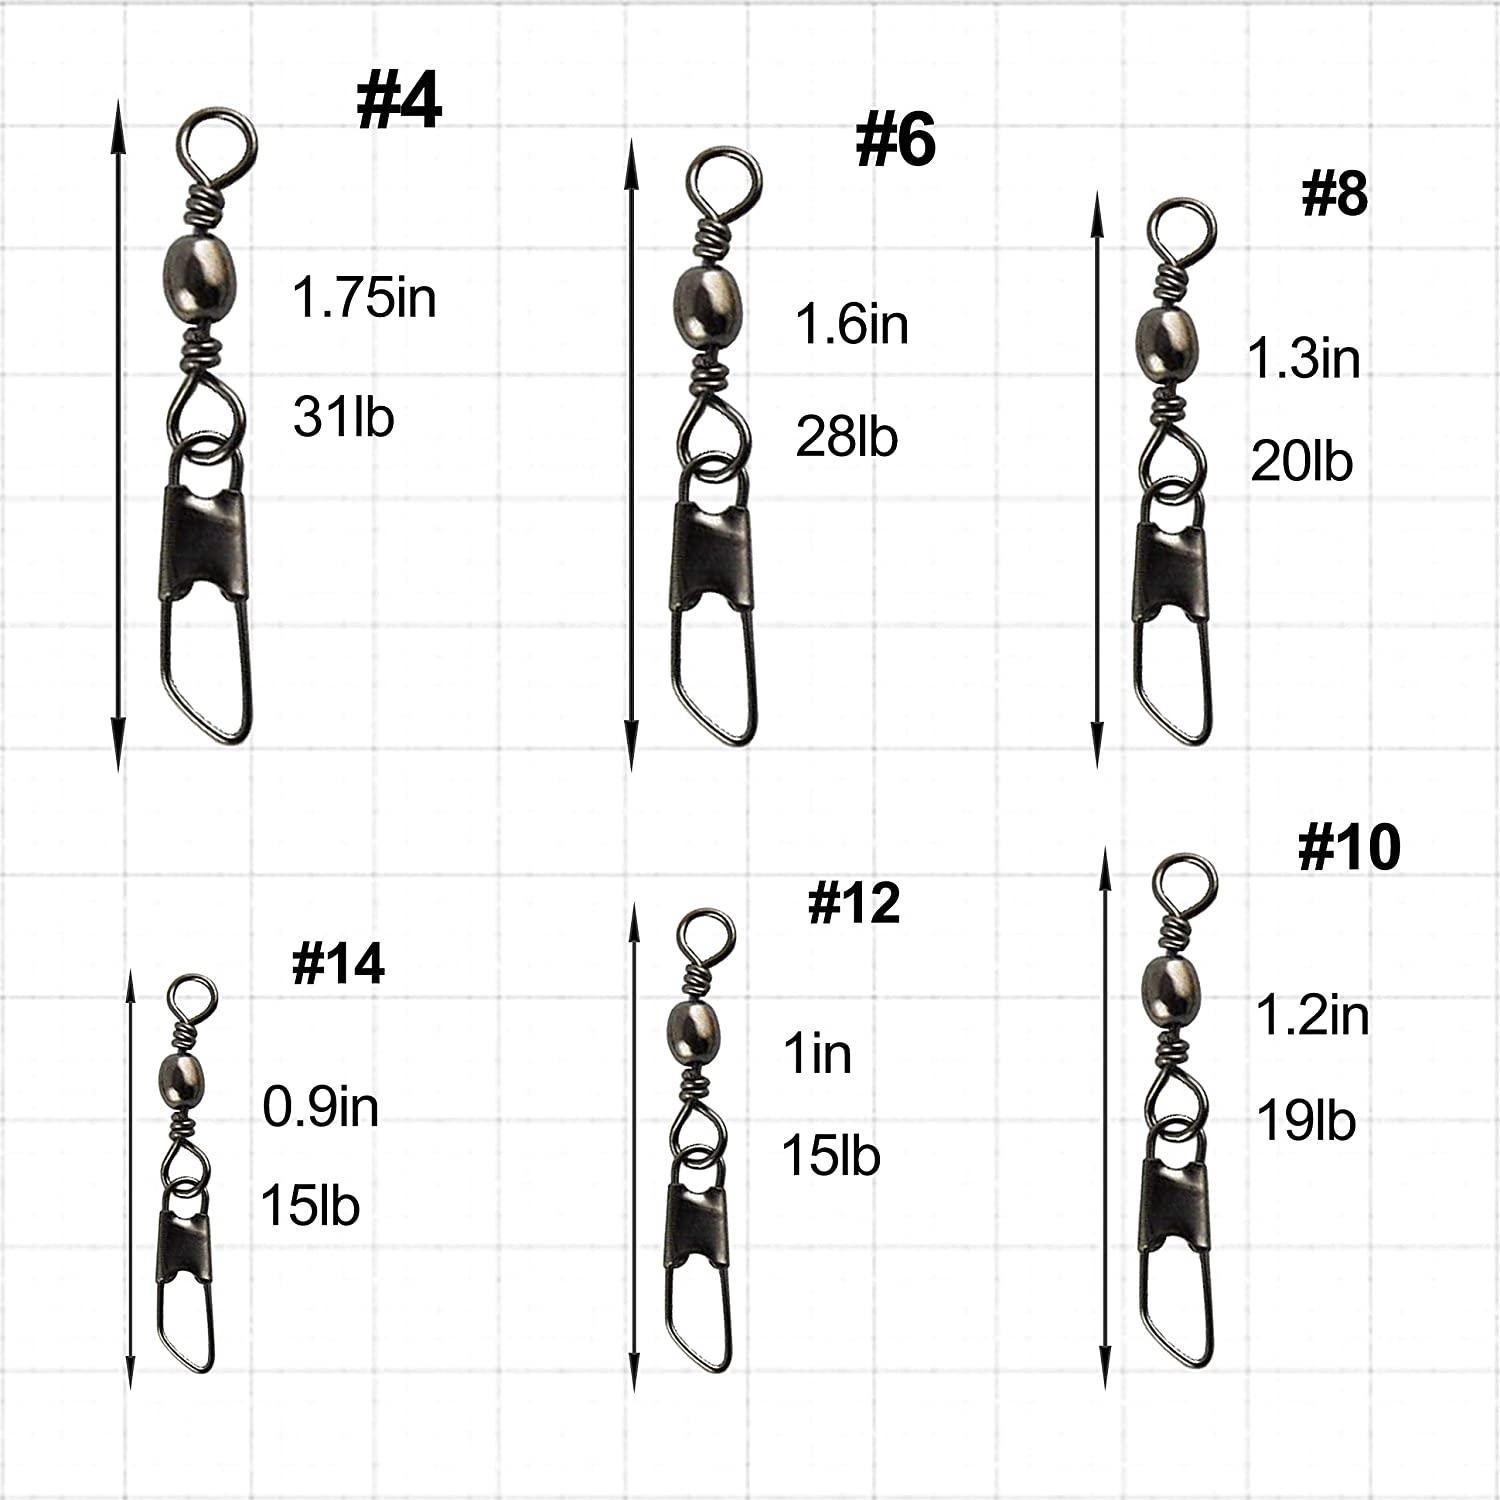 Fishing Barrel Swivel with Nice Snap-100pcs Fishing Connector Snap Swivels Solid Rings Fishing High Strength Fishing Accessories Fishing Tackle